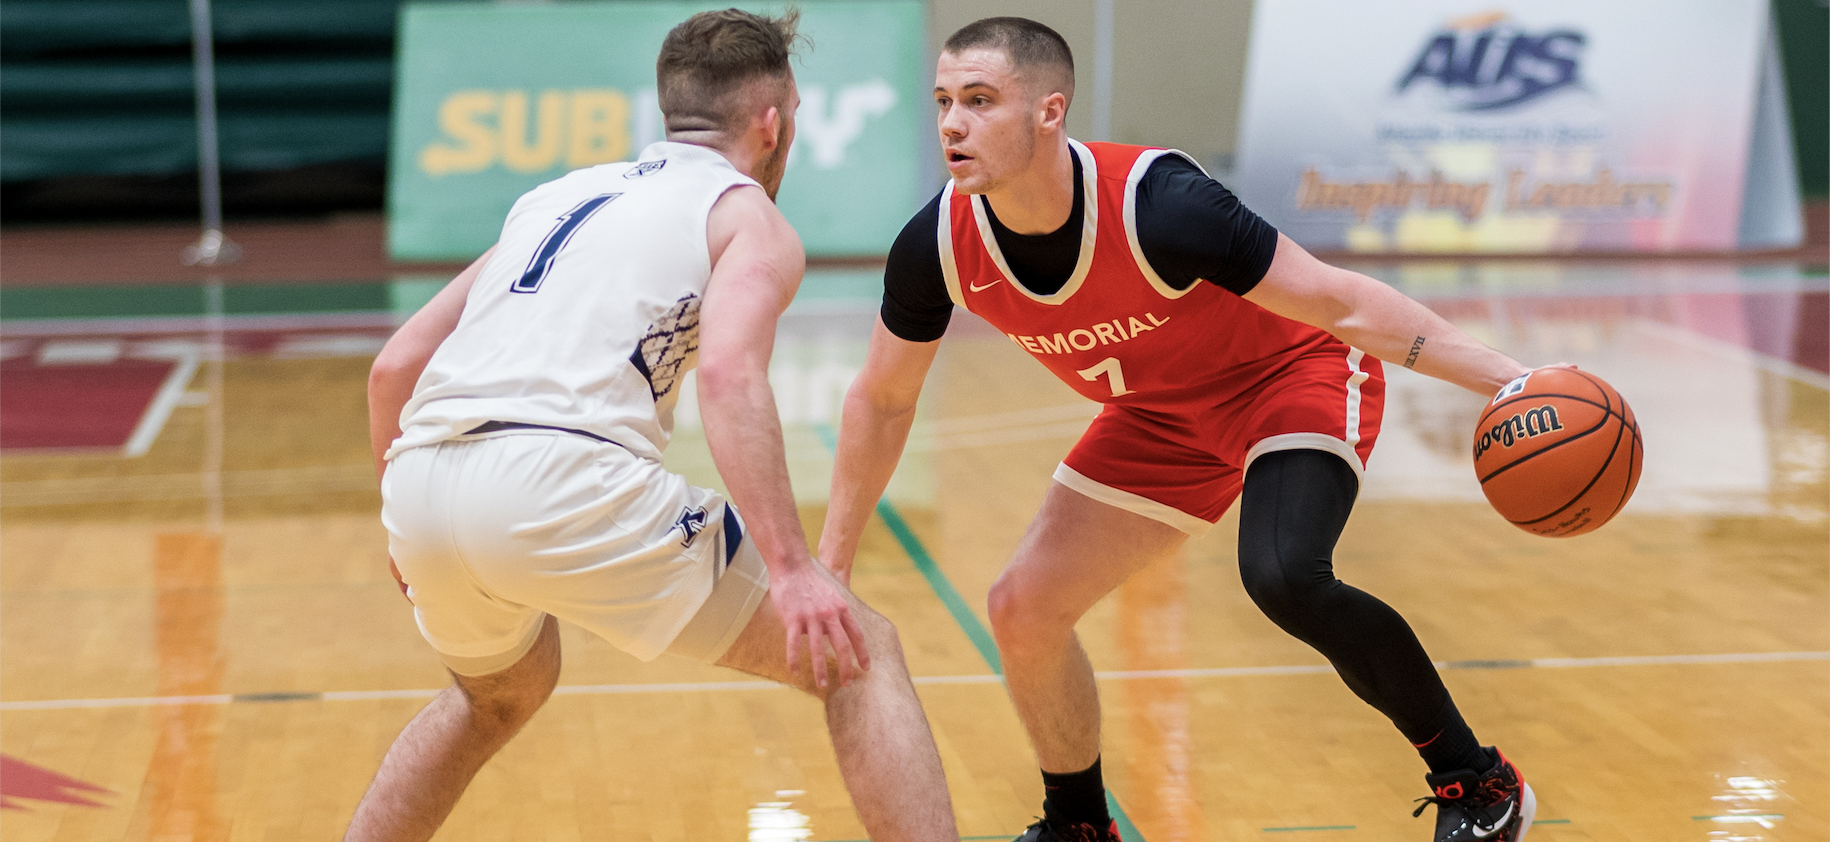 Sea-Hawks Travel to Cape Breton for Pair of Games vs Capers